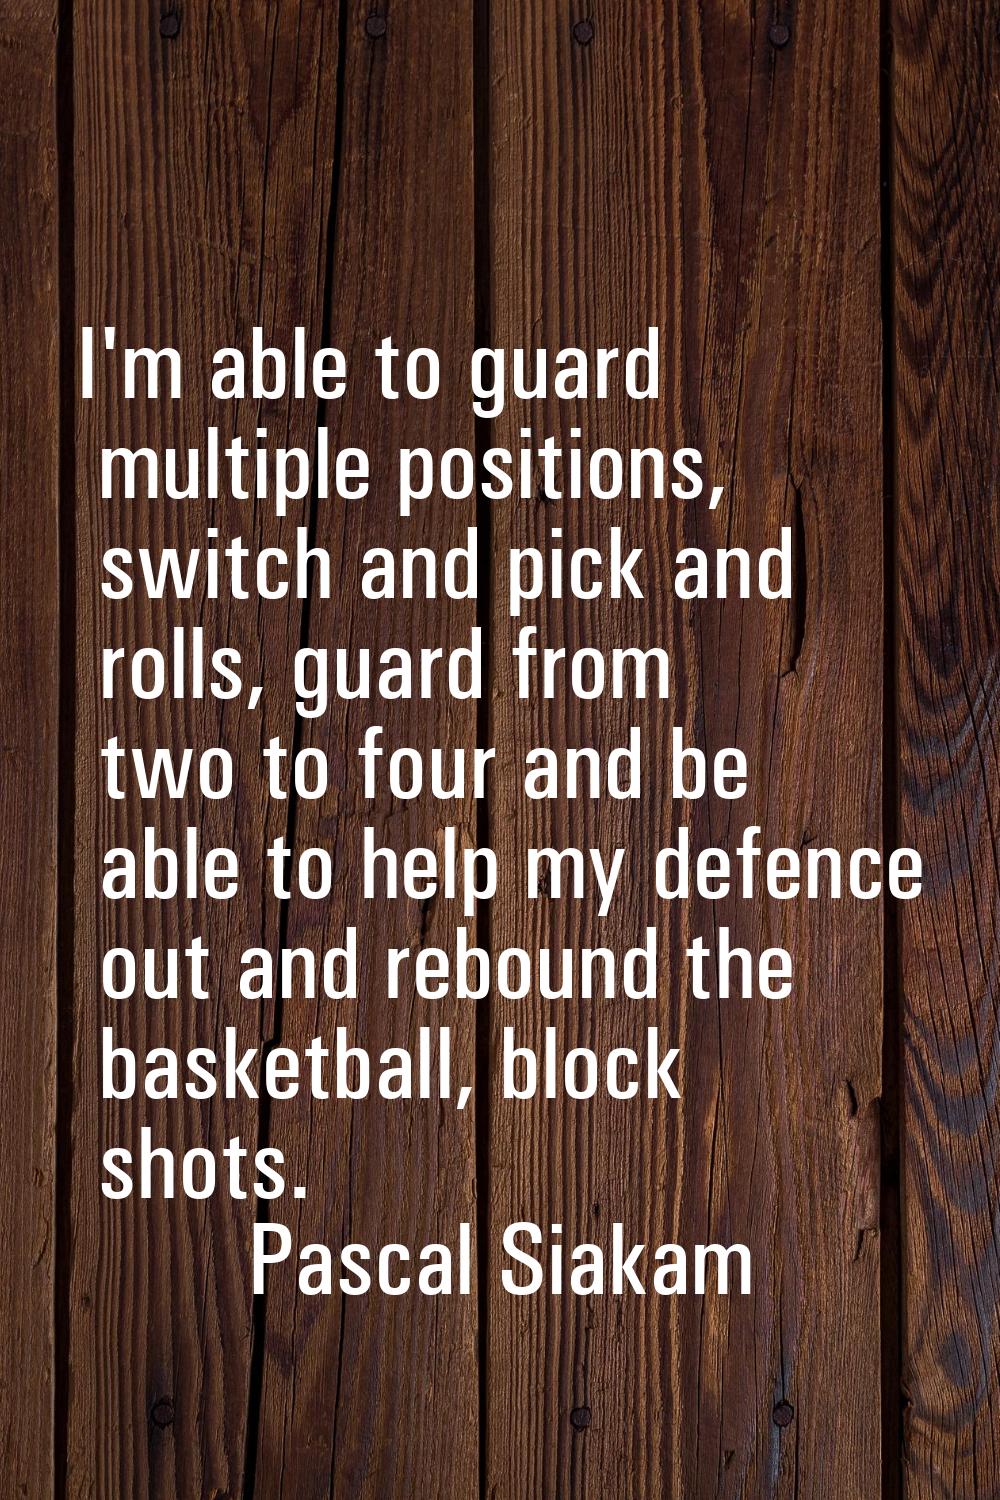 I'm able to guard multiple positions, switch and pick and rolls, guard from two to four and be able